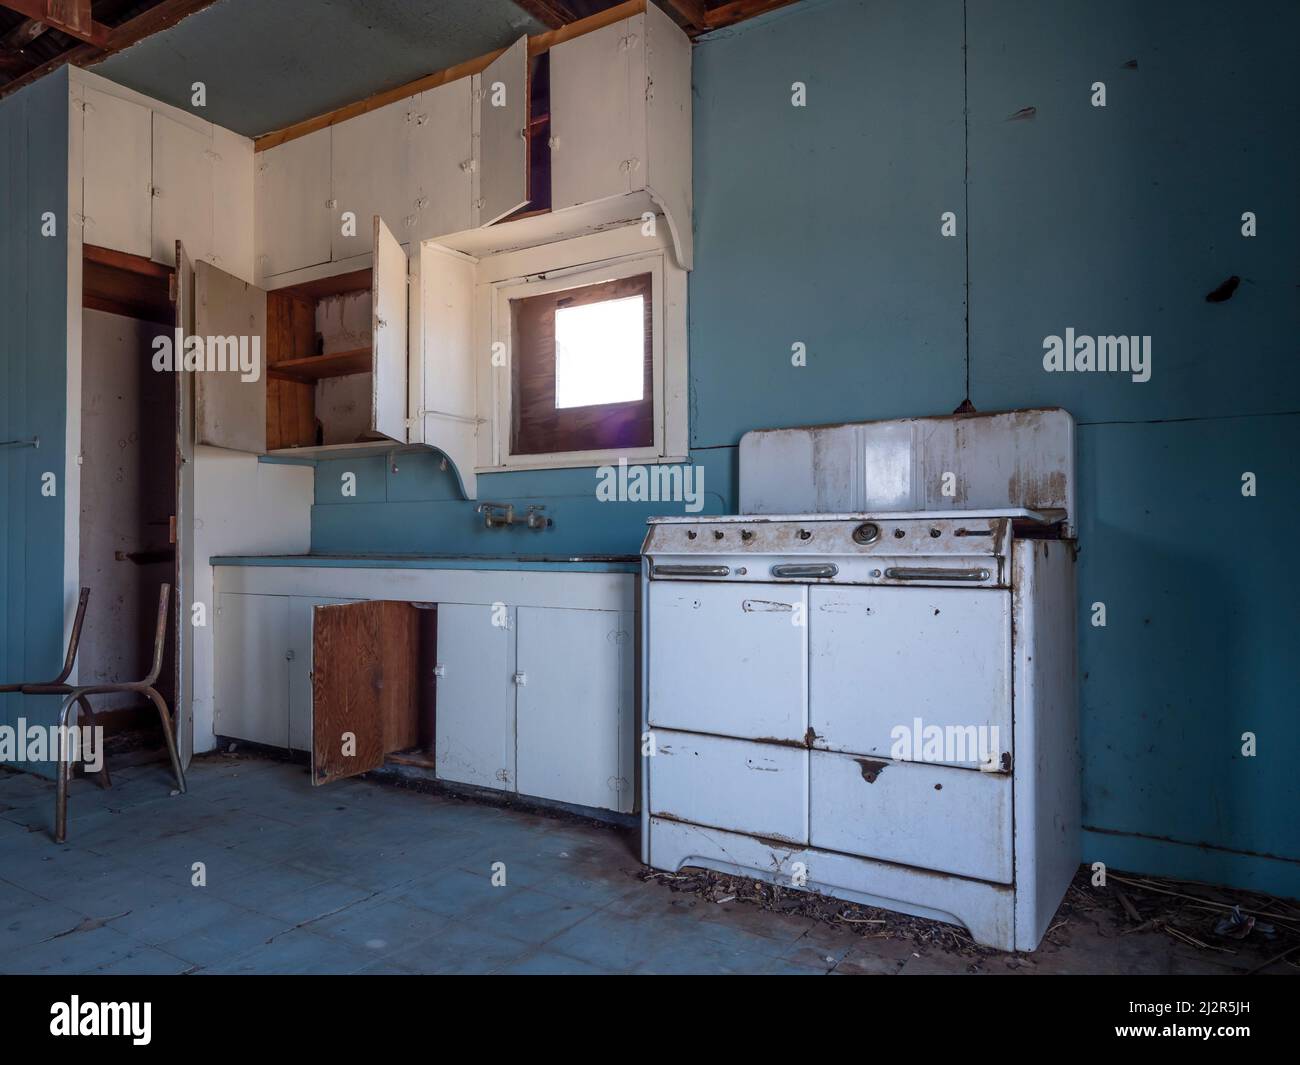 Kitchen in Henry Gray's abandoned home, Bates Well ranch, Organ Pipe Cactus National Monument, Arizona. Stock Photo